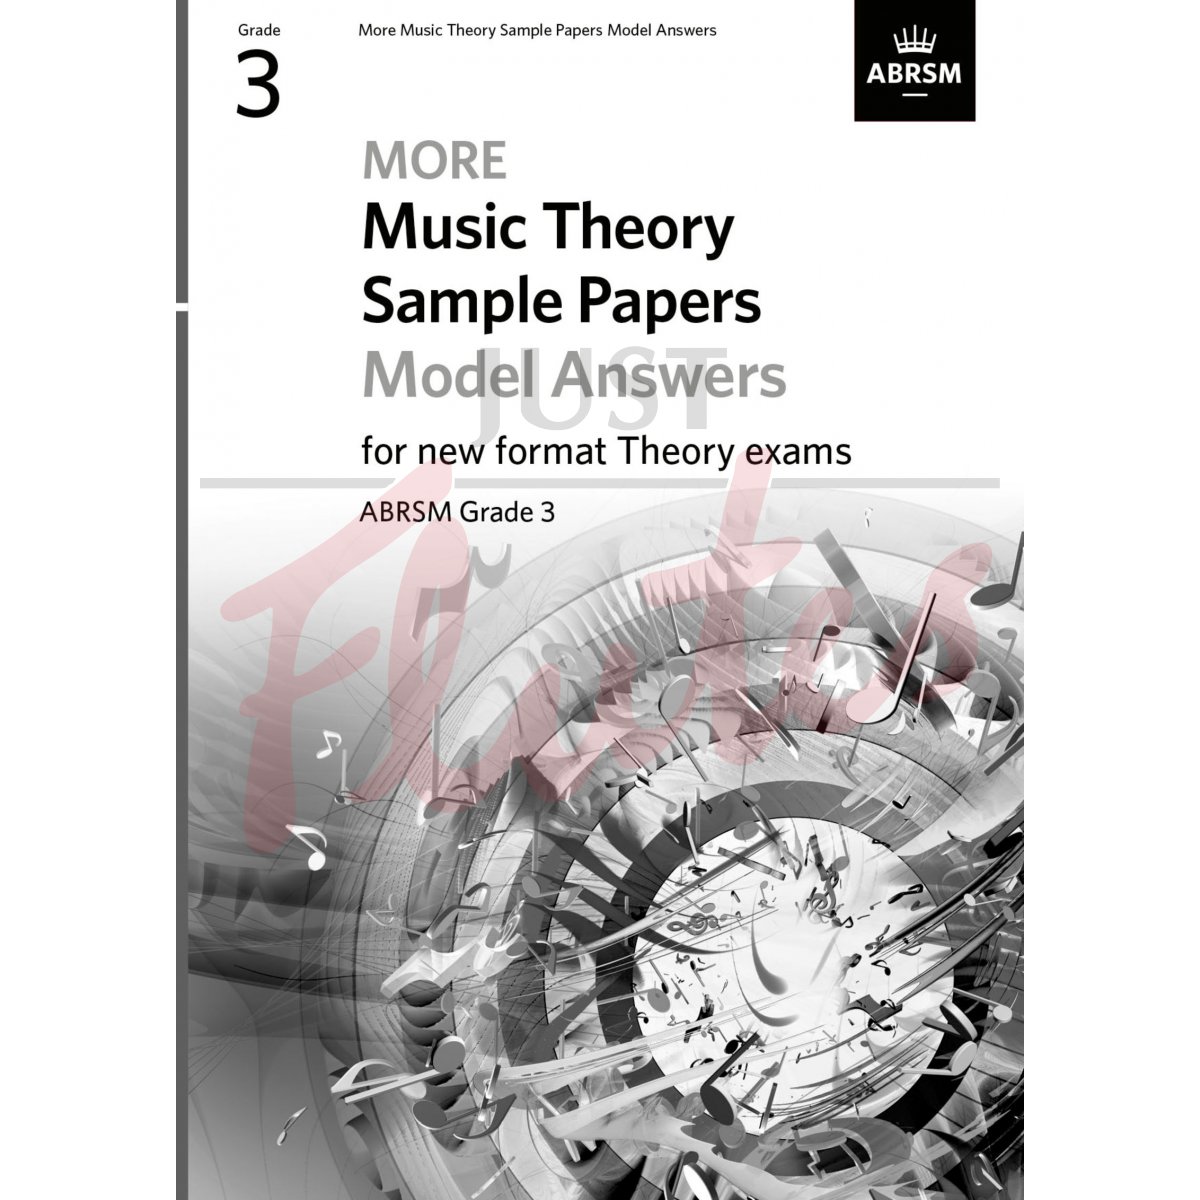 More Music Theory Sample Papers Grade 3 Model Answers